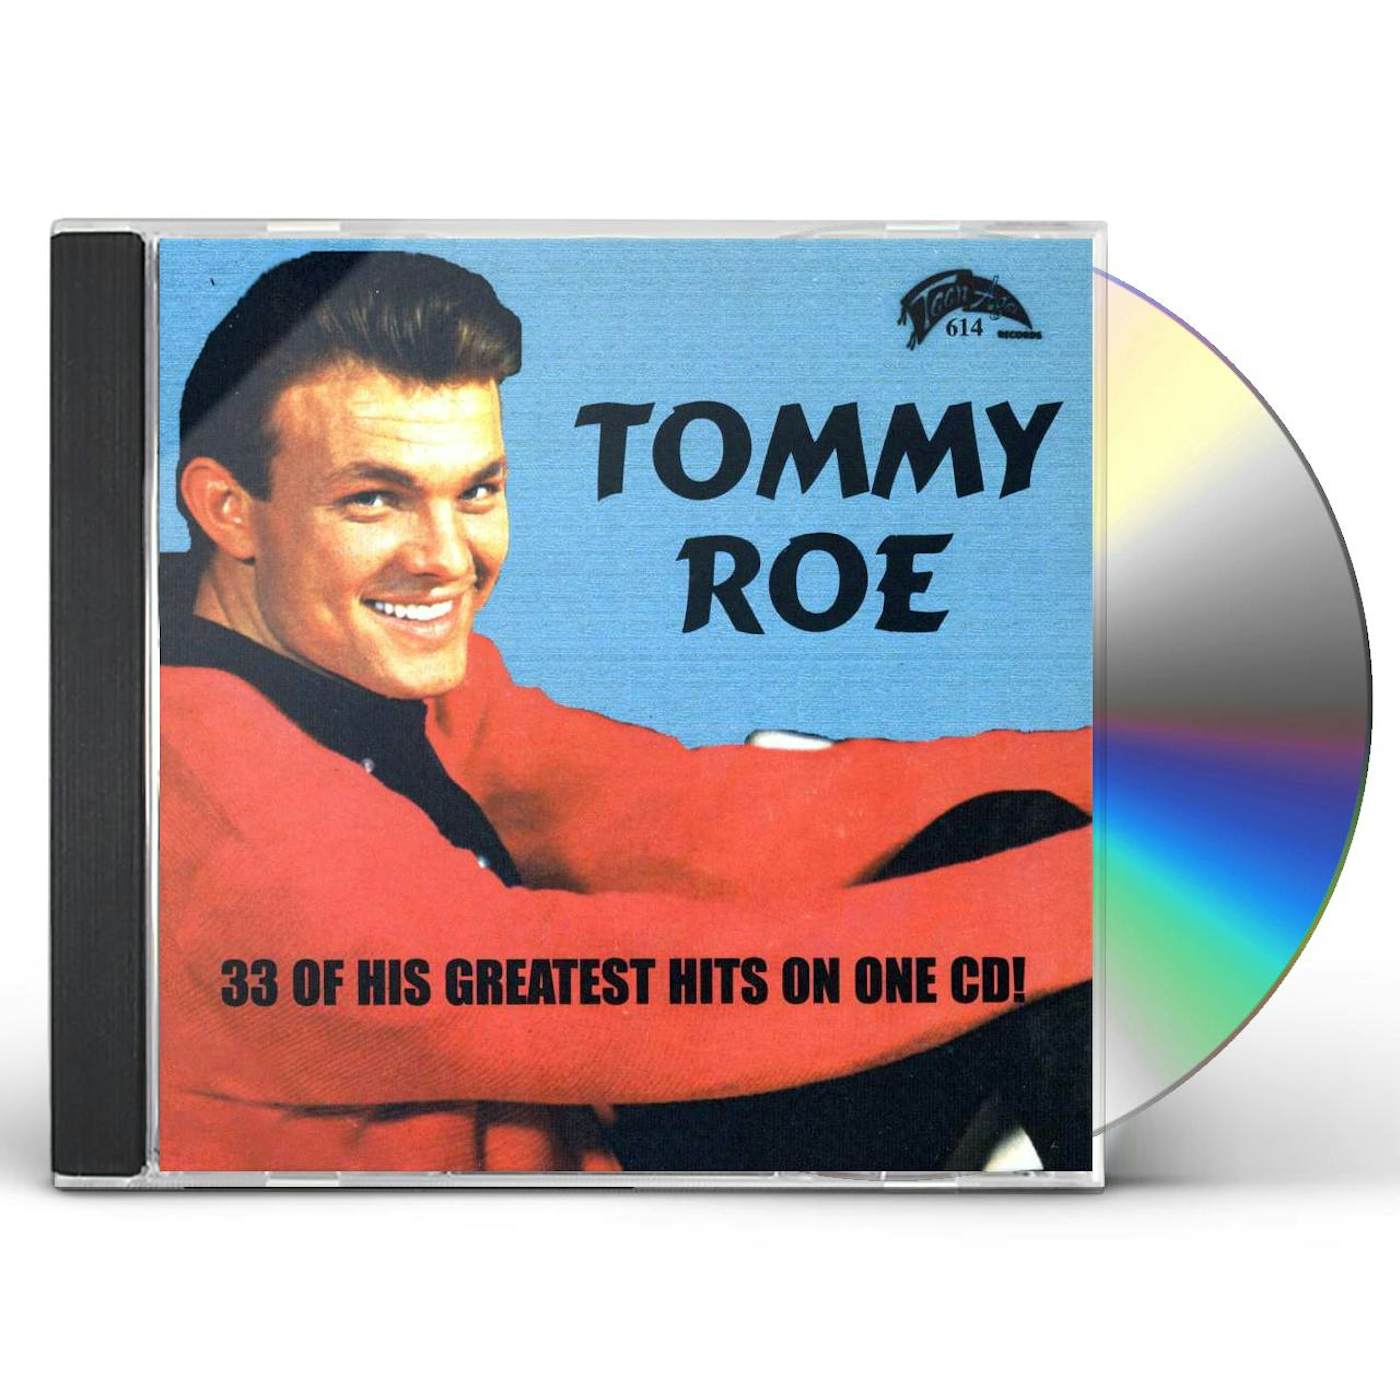 Tommy Roe 33 GREATEST HITS CD